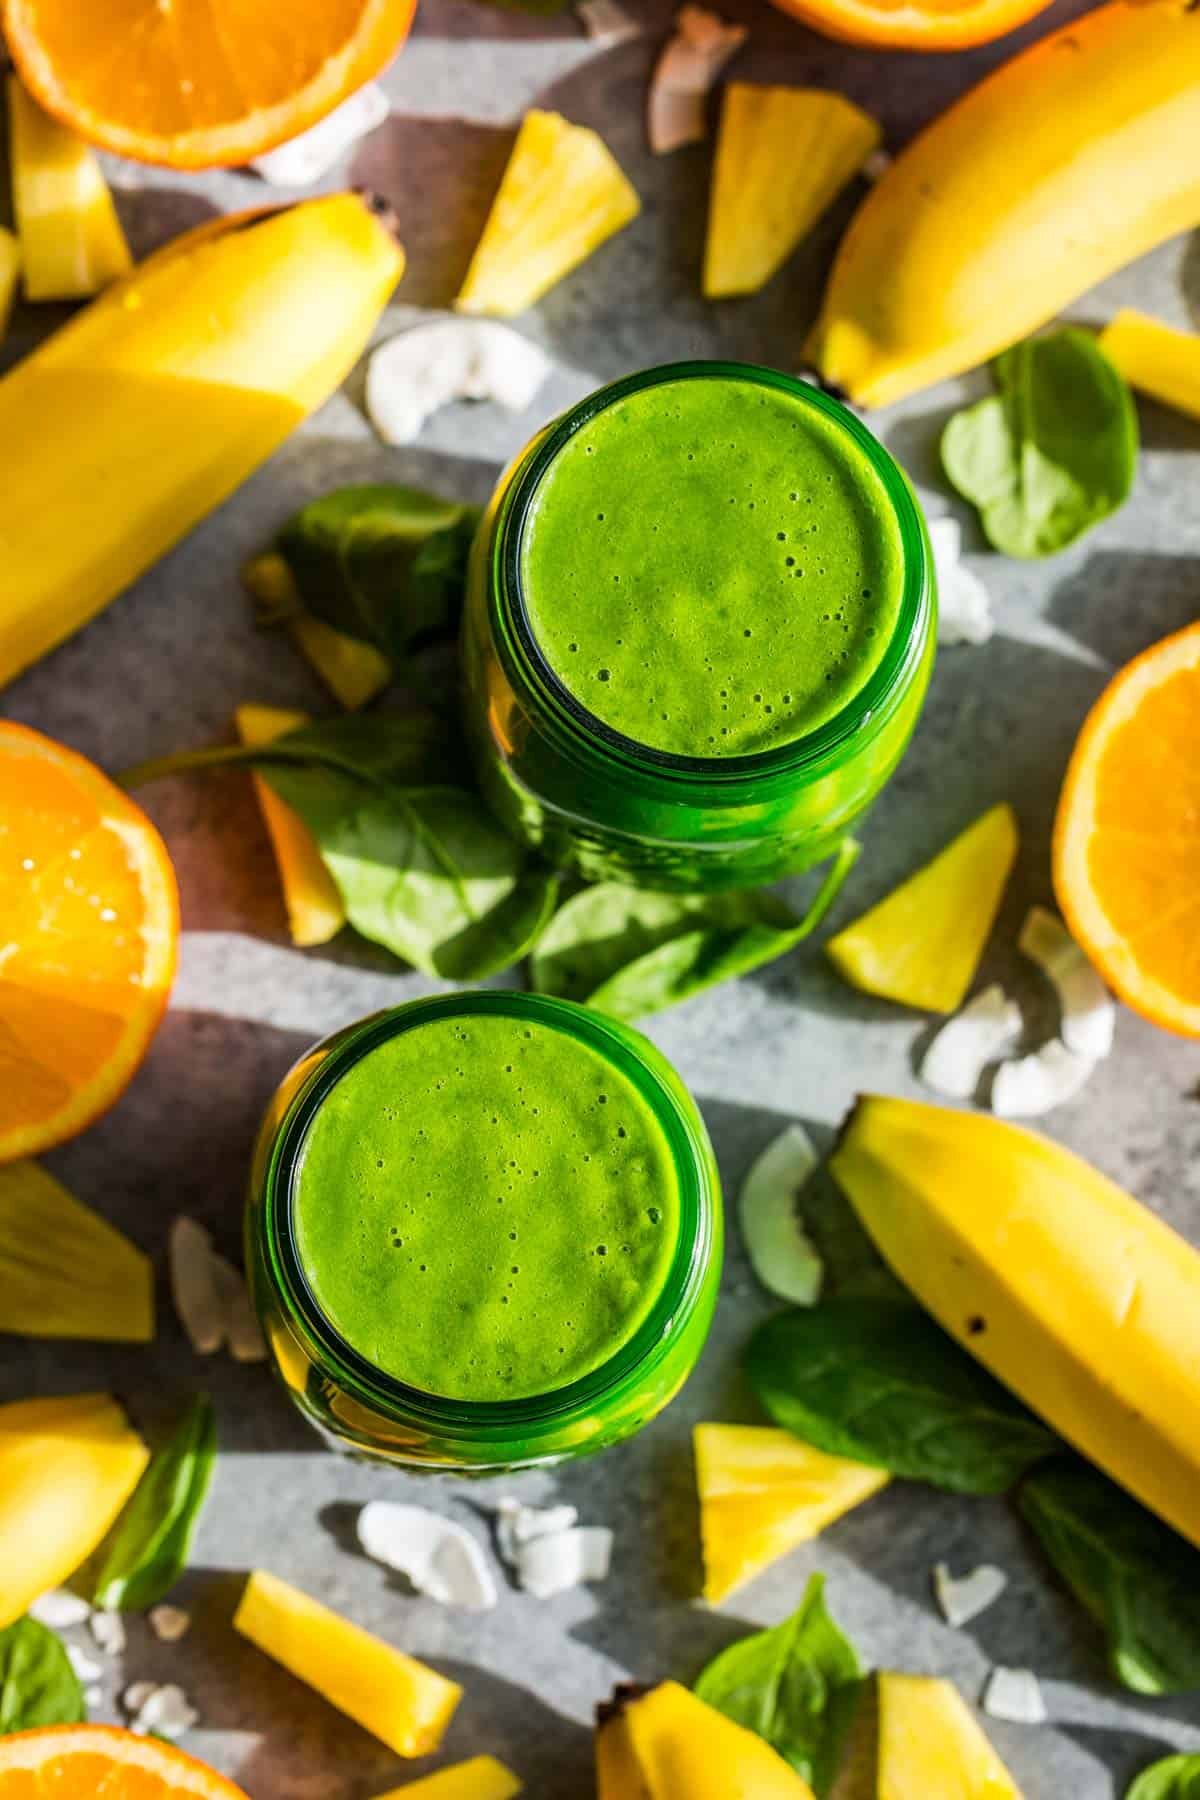 Two green jars filled with tropical green smoothie with bananas, pineapple pieces, and halved oranges around the jars.